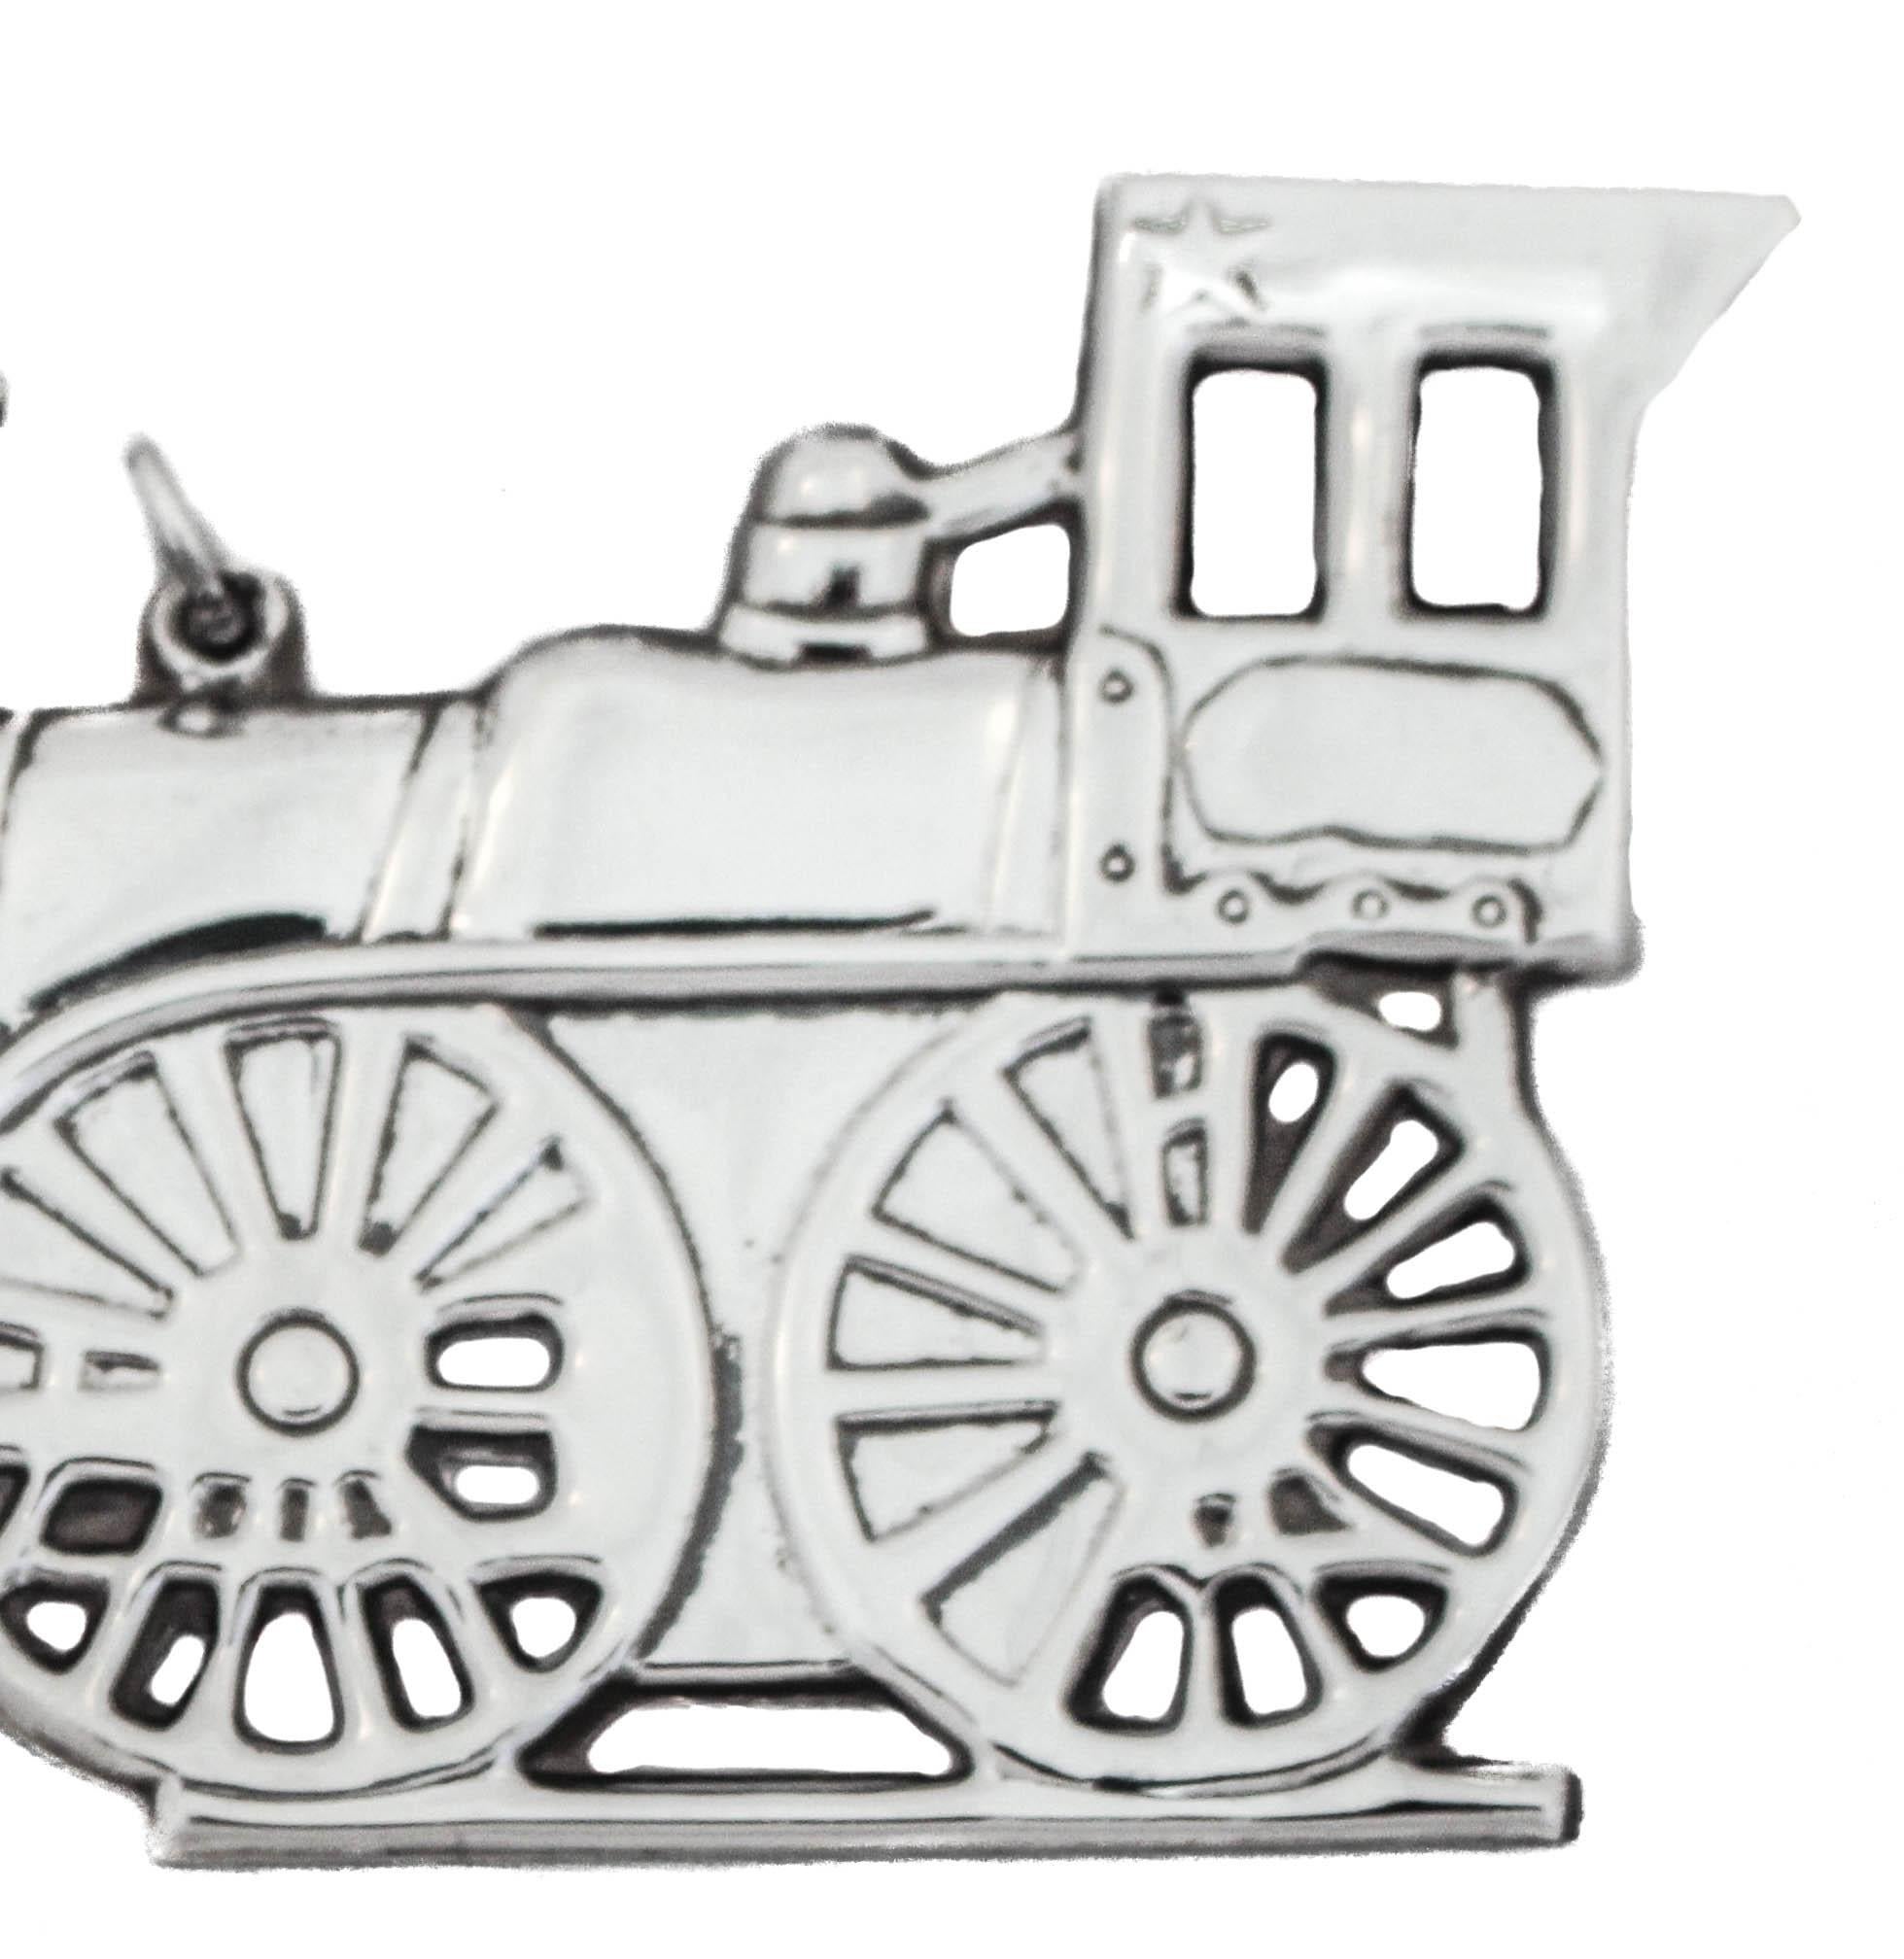 Being offered is a sterling silver Christmas ornament of a (choo-choo)locomotive train made by Gorham Silversmiths and signed 1976.  
The connection between toy trains and Christmas comes from a time when people traveled long distances to reach home